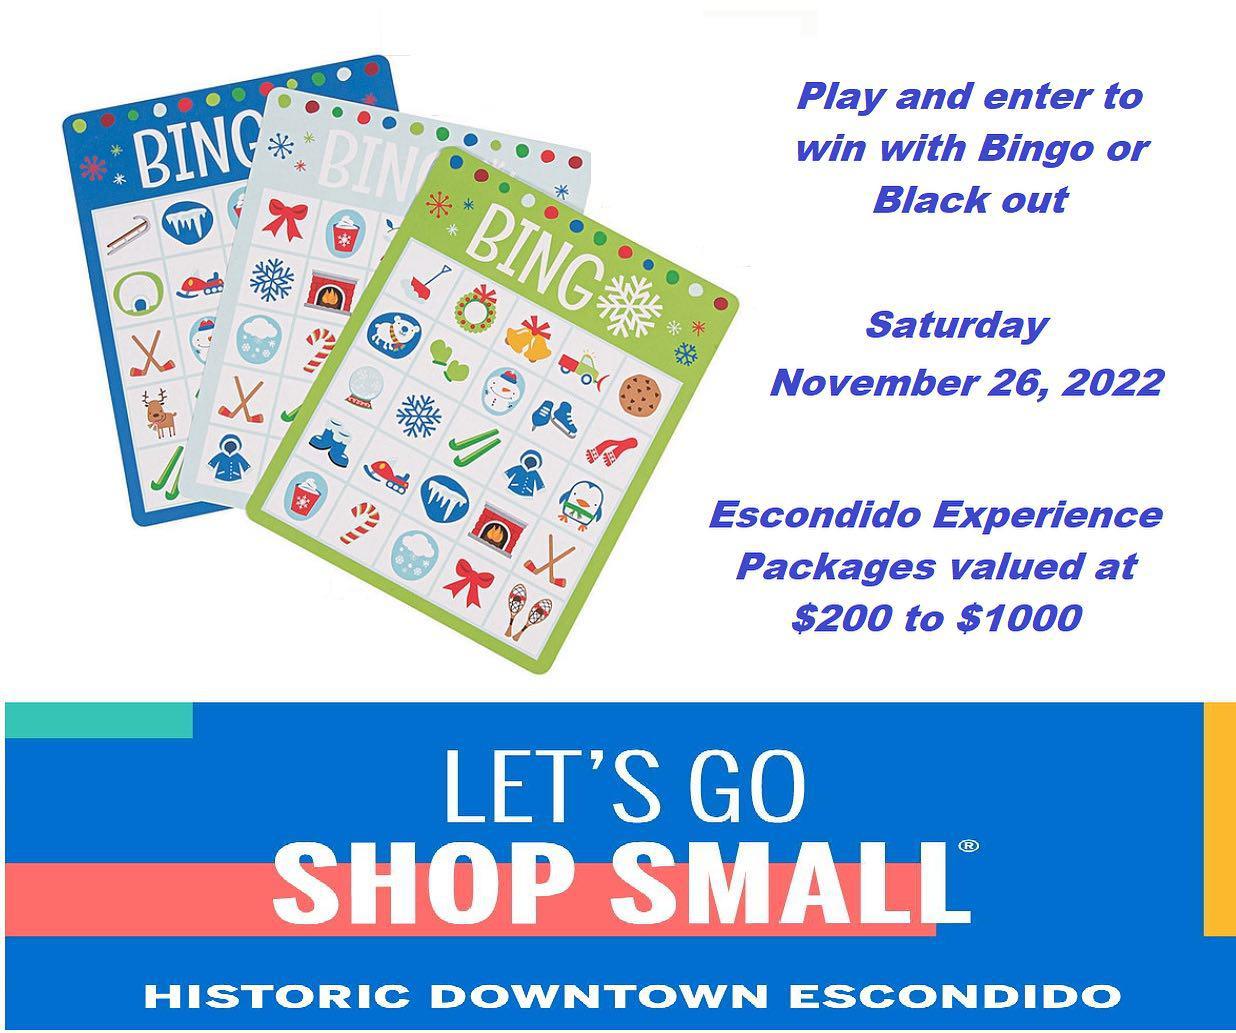 Support Downtown Businesses on Small Business Saturday (11/26/22!) by participating in our DOWNTOWN BINGO GAME! Get one or more stickers on your Bingo Card by making a purchase at ANY participating businesses and get entered to WIN an ESCONDIDO EXPERIENCE PACKAGE! (Valued between $200 and $1000!) Fill your bingo card entirely with stamps to get a black out, which will also enter you to win one of the most premier Escondido Experience Packages (Valued at $500 or more!). These packages feature amazing prizes from Escondido-based brick and mortar businesses around experience themes: perfect for foodies, art lovers, shopping addicts, and show-goers! Experience something new this holiday season: play BINGO with us and WIN BIG!